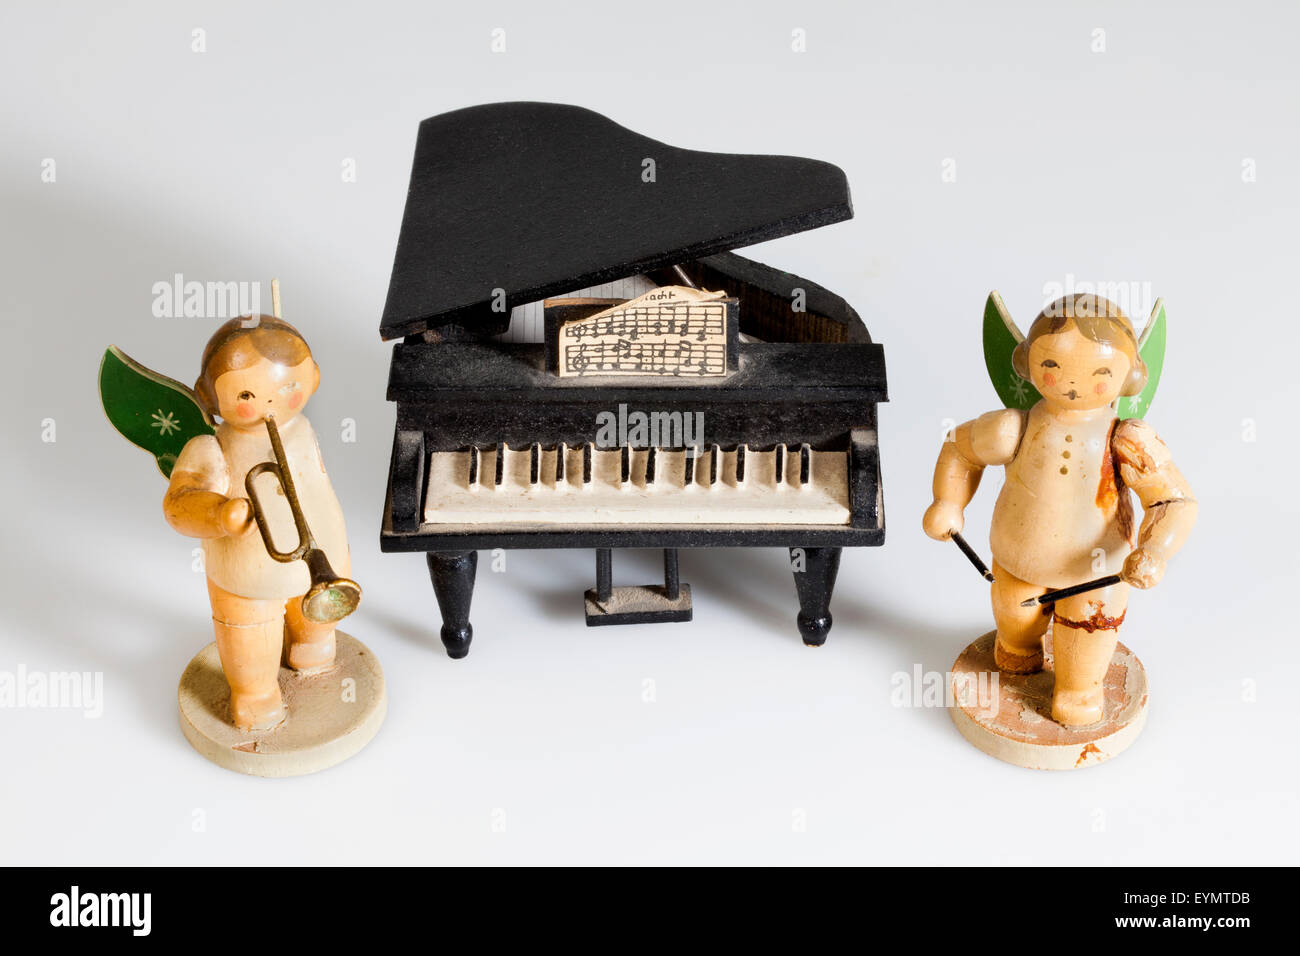 Broken wooden angels playing musical instruments, from the Erzgebirge, Germany, Europe Stock Photo